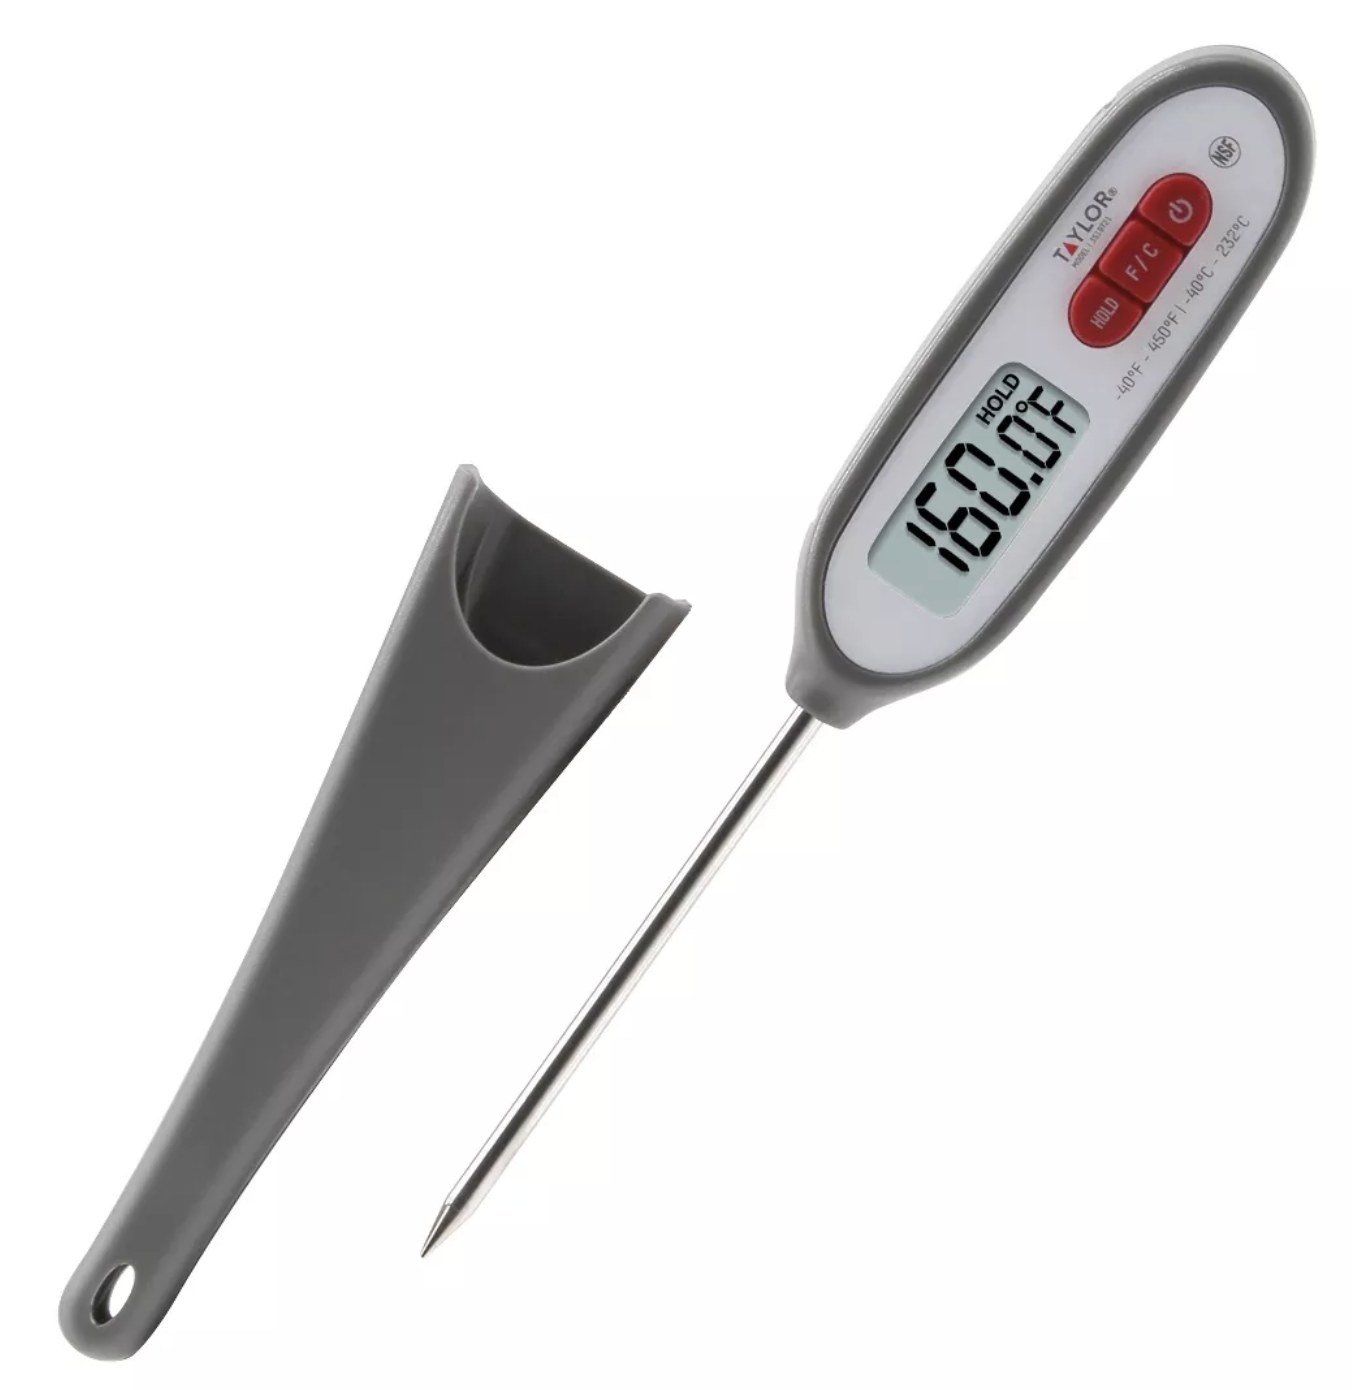 a grey kitchen thermometer with a red button and grey cap. the digital screen reads 160 degrees Fahrenheit 